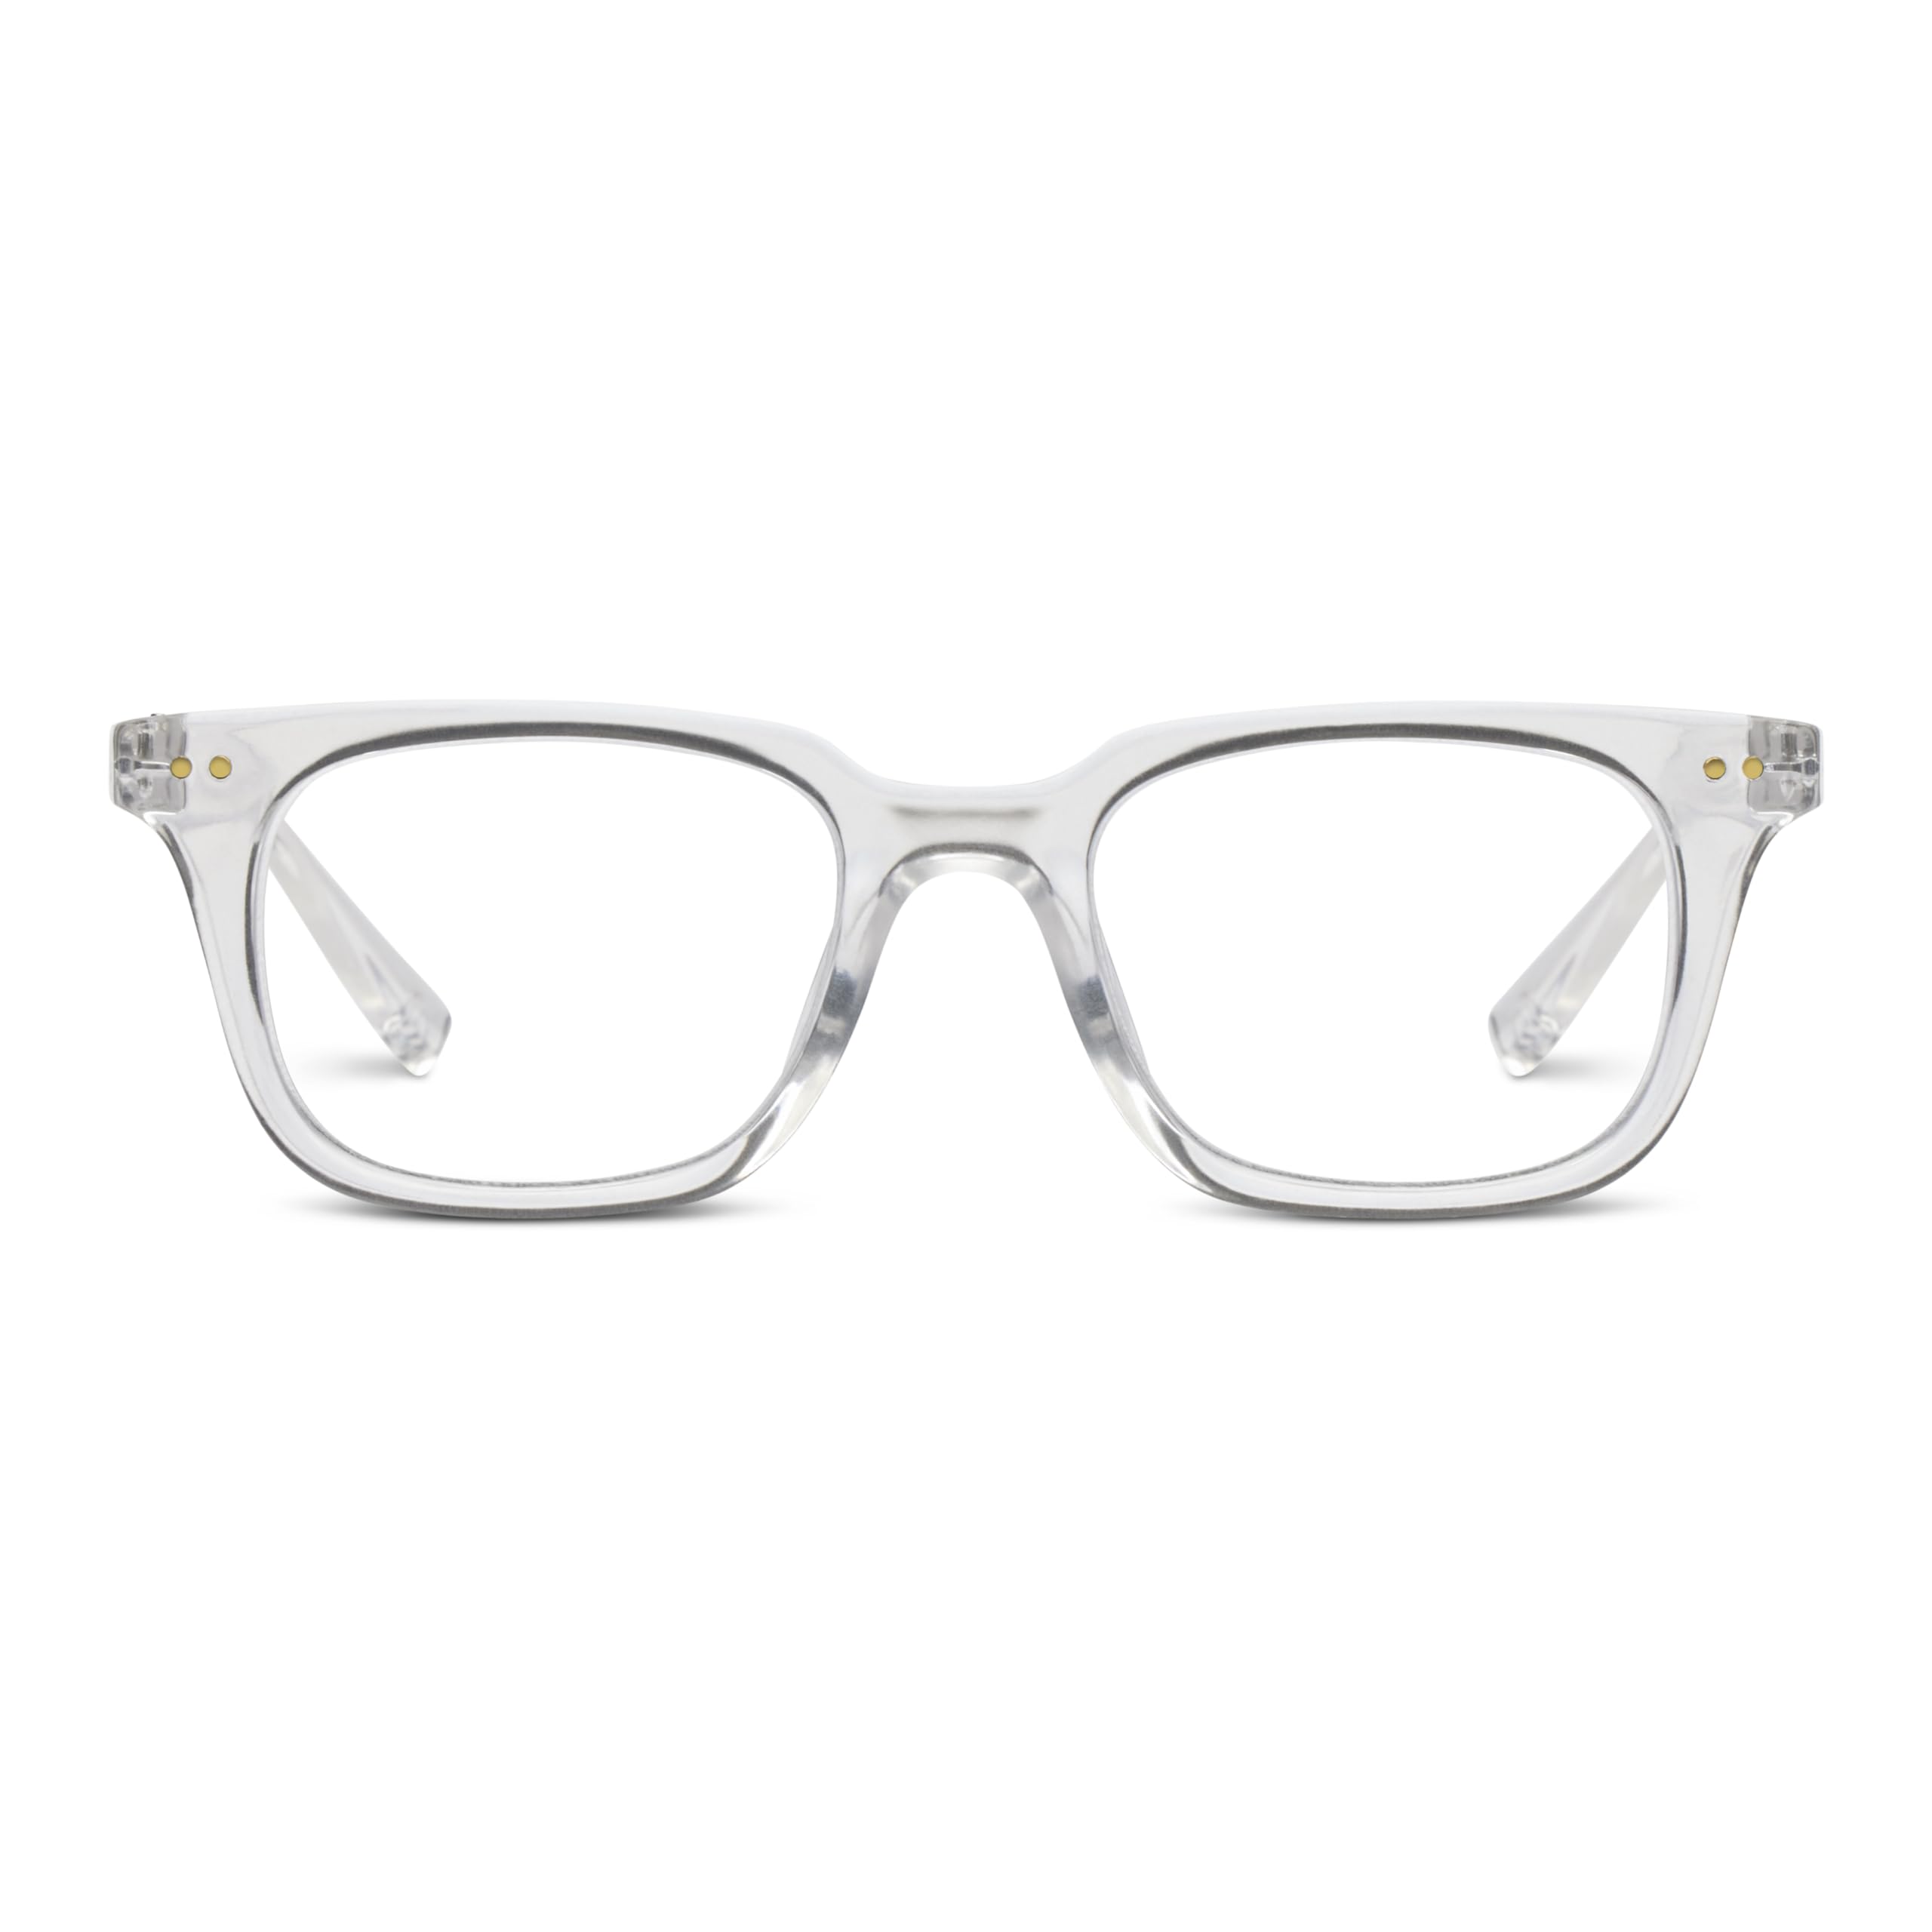 Peepers by PeeperSpecs Tennessee Square Blue Light Blocking Reading Glasses